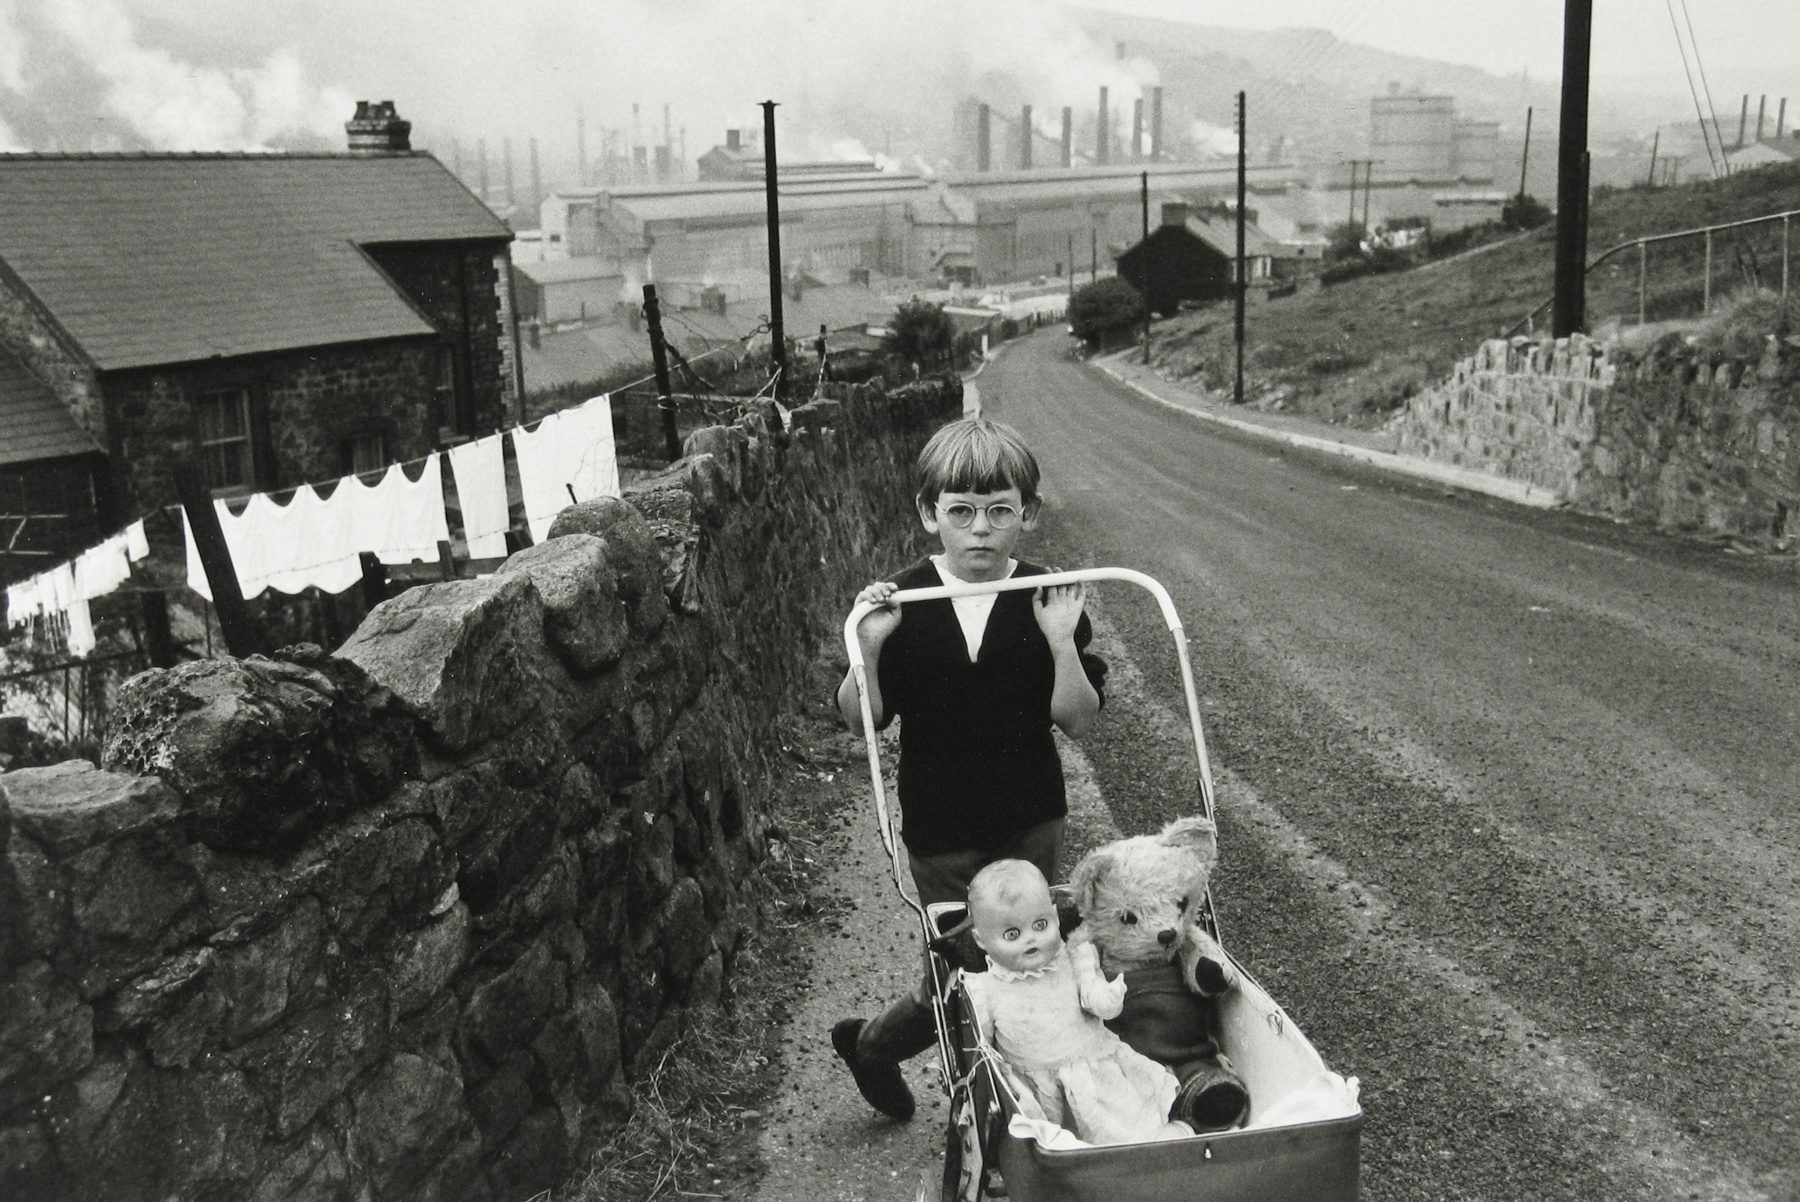 An iconic portrait taken in Wales and included in included in a new Bruce Davidson exhibition